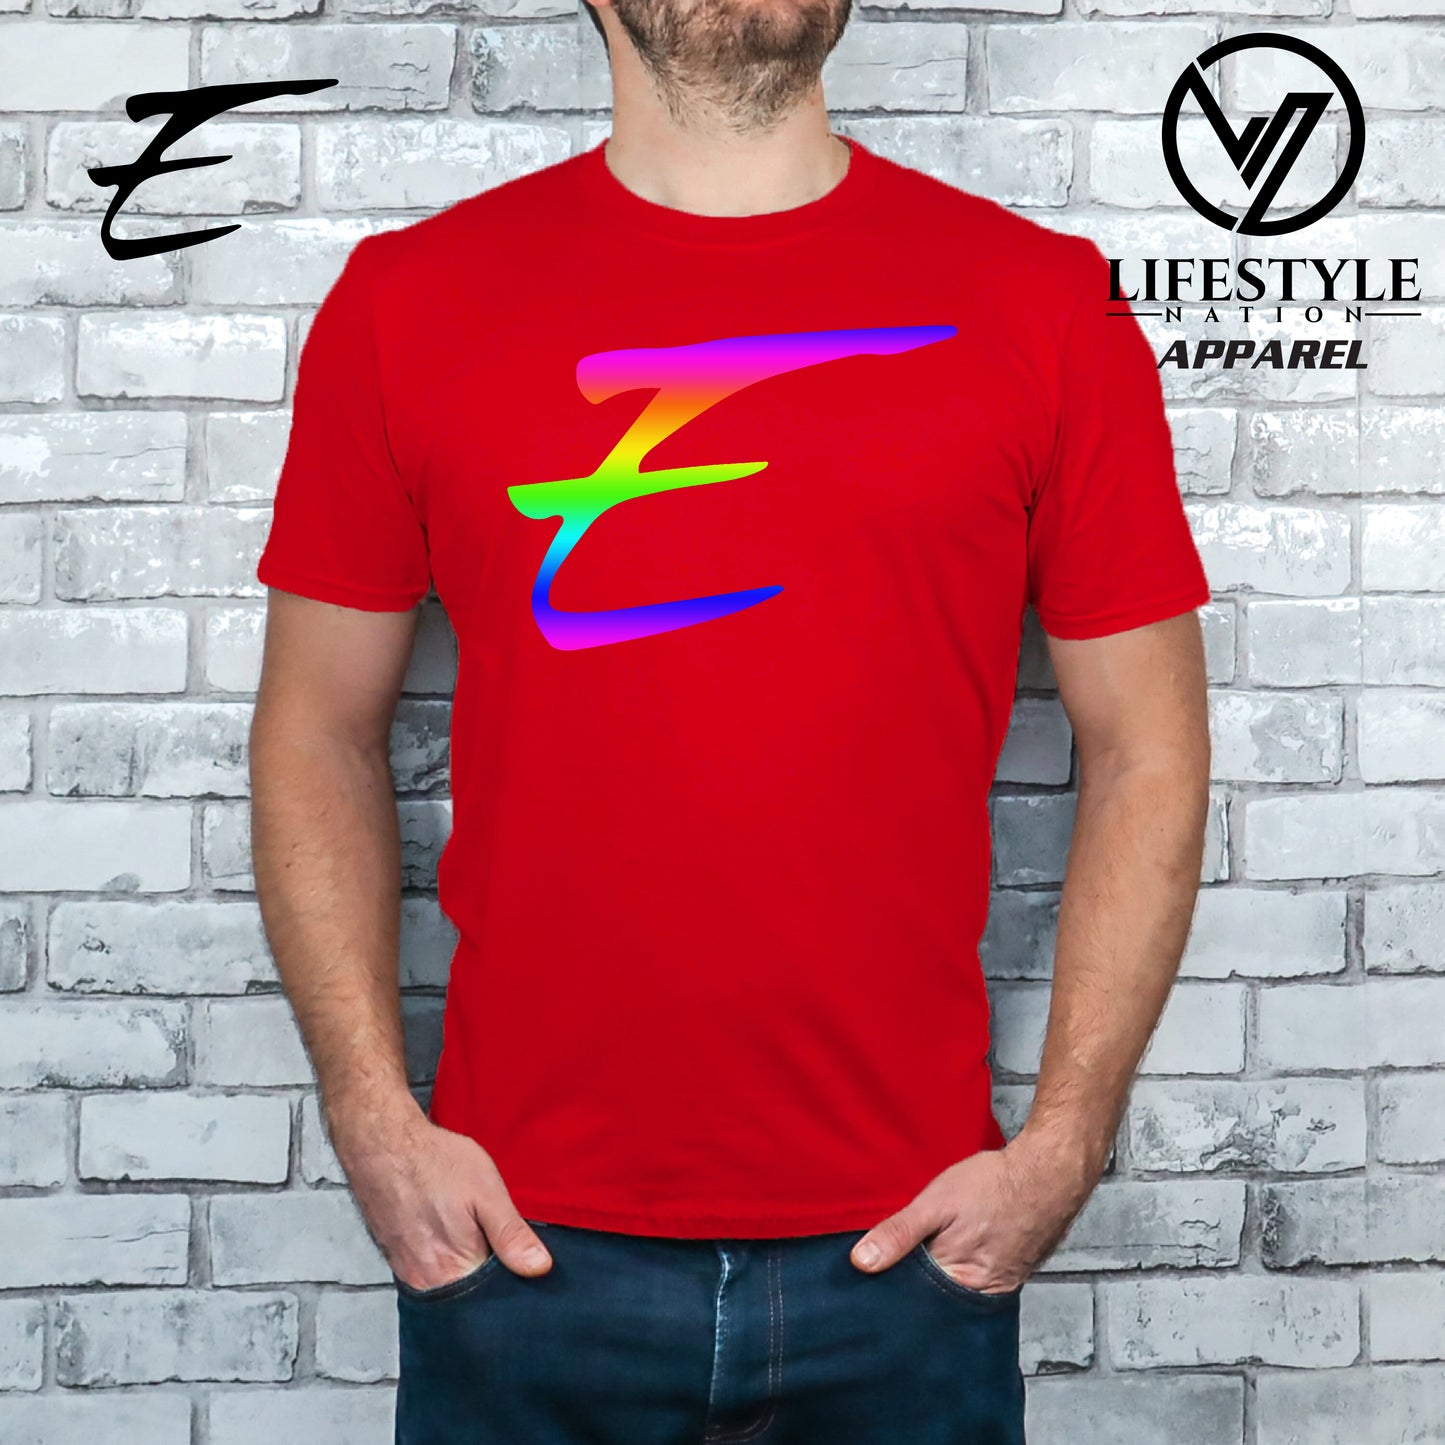 Club Eden T-Shirt Softstyle with Rainbow E - Pick Color